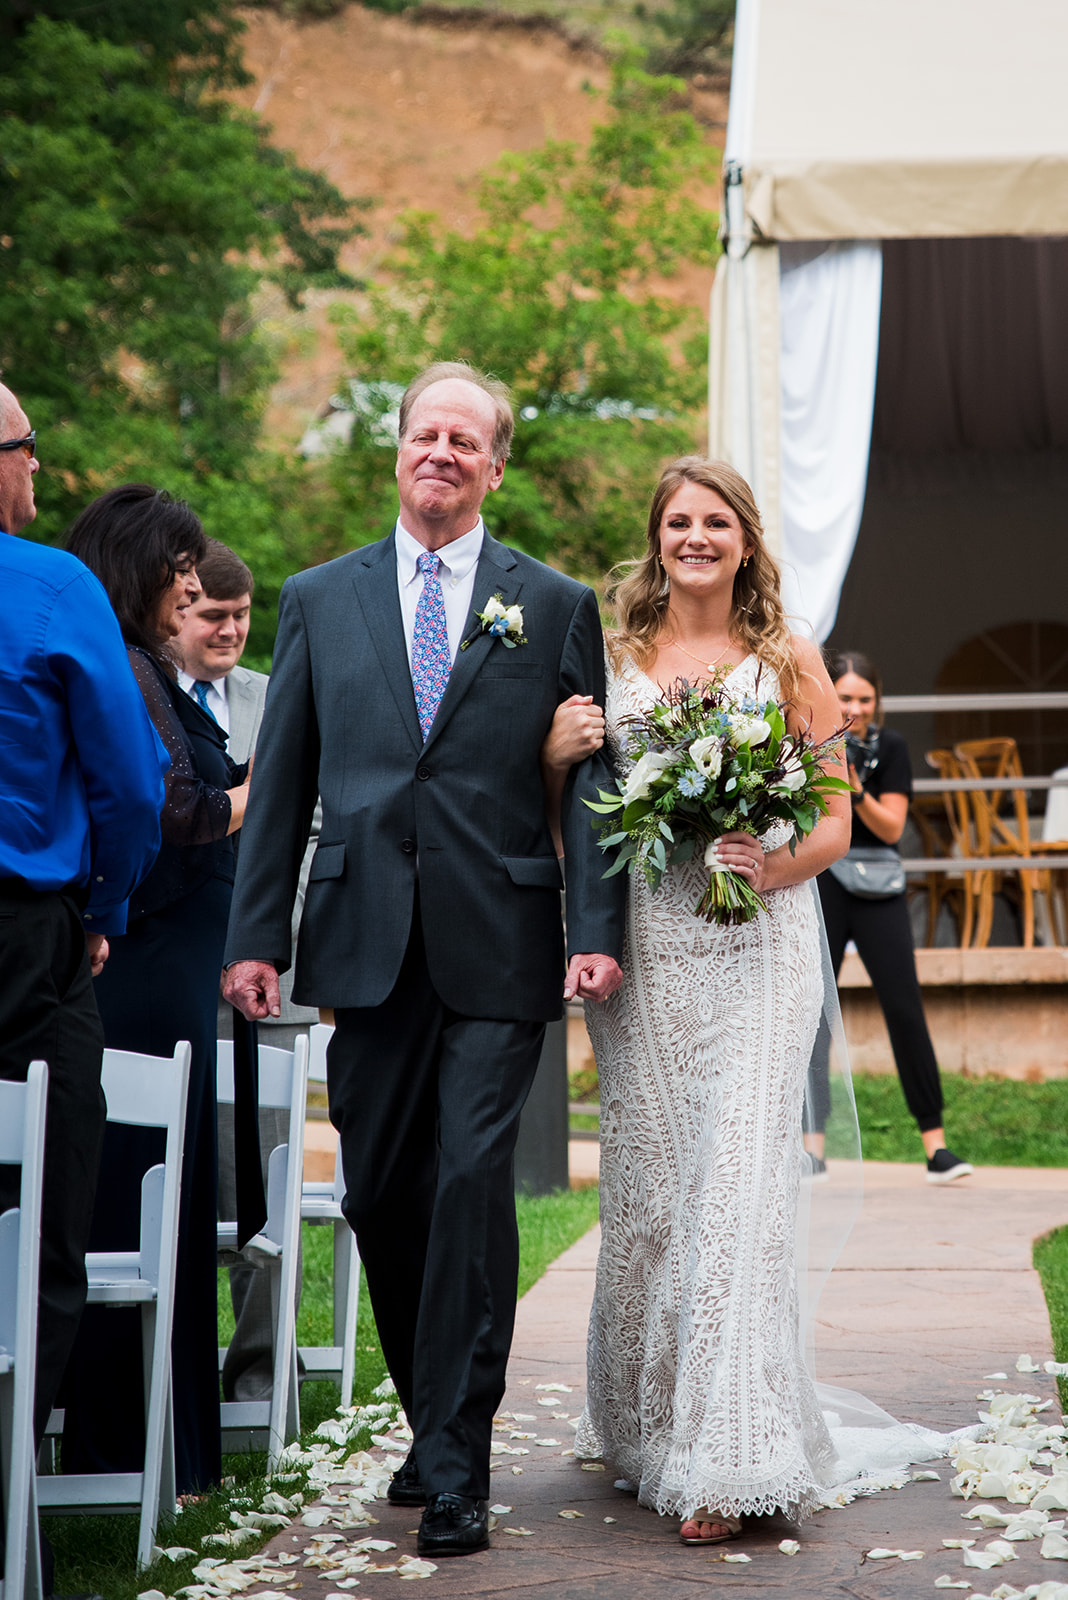 Father of the bride walks his daughter down the aisle toward her groom.